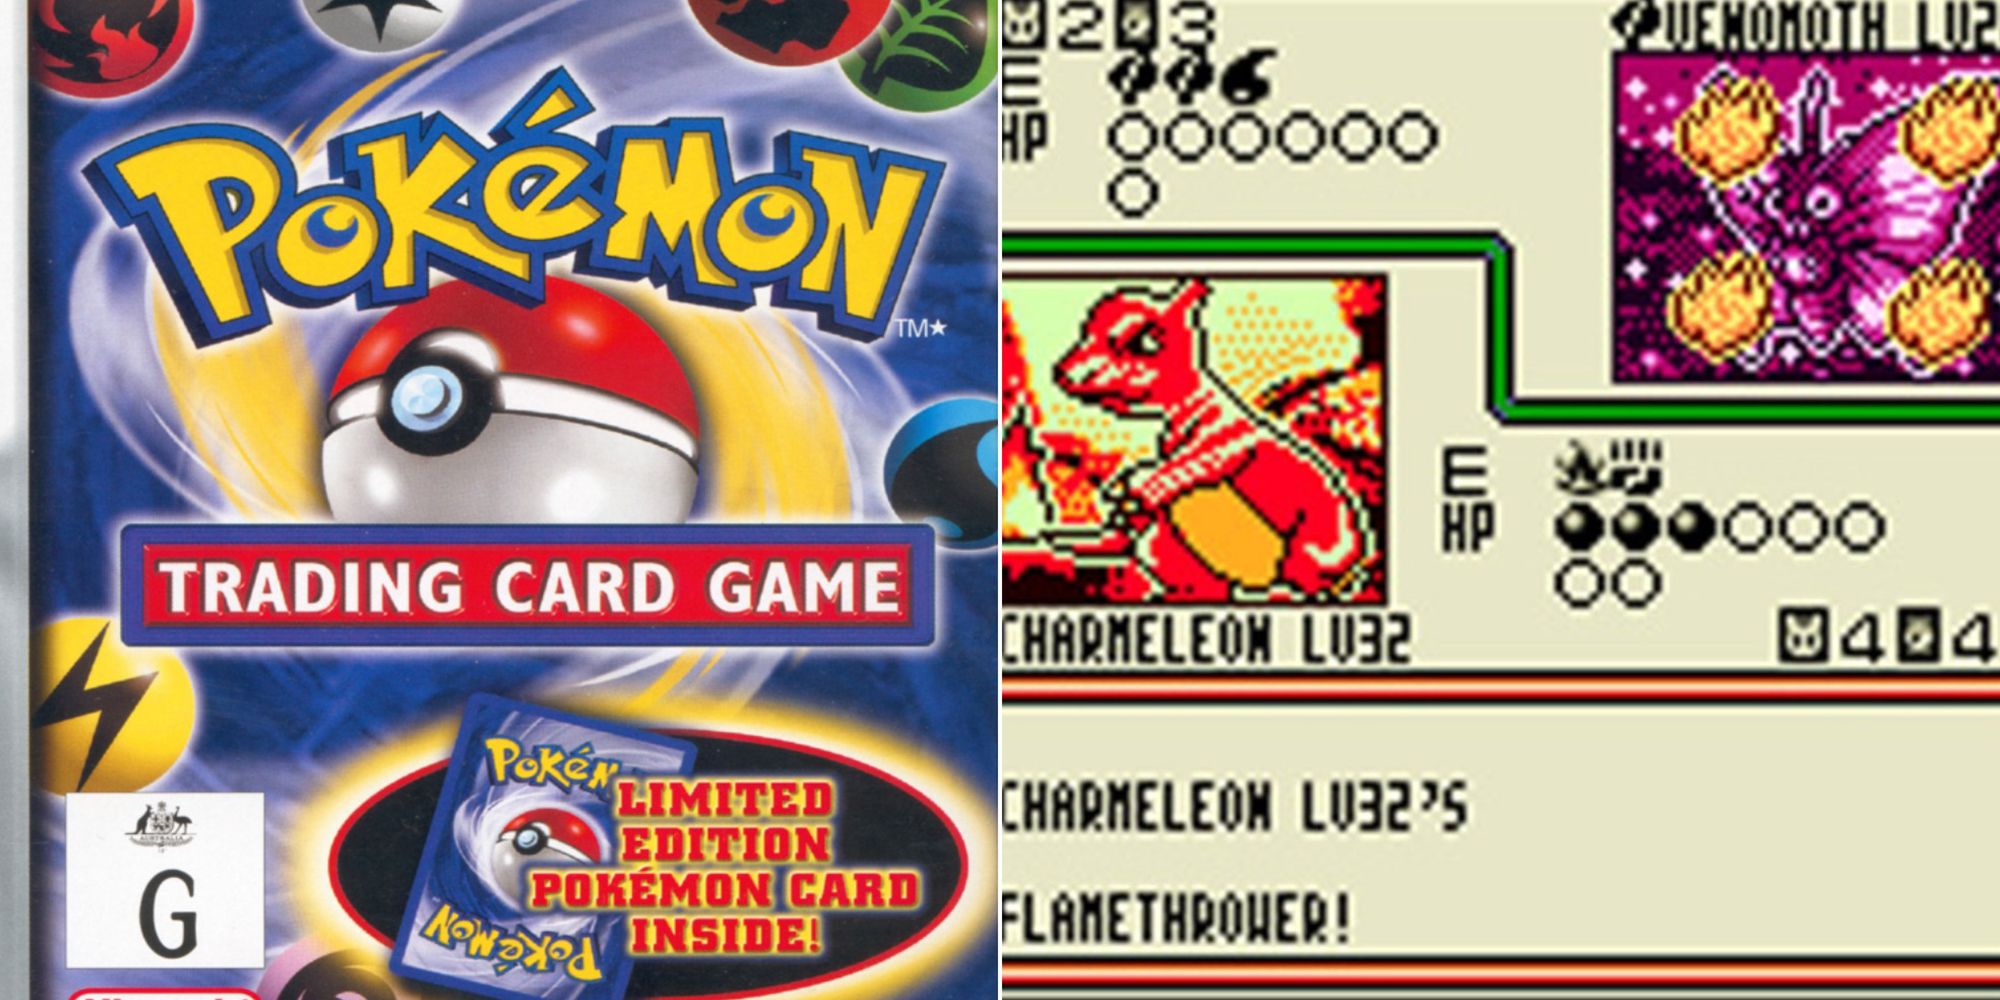 Pokemon Trading Card Game (Game Boy) cover and match